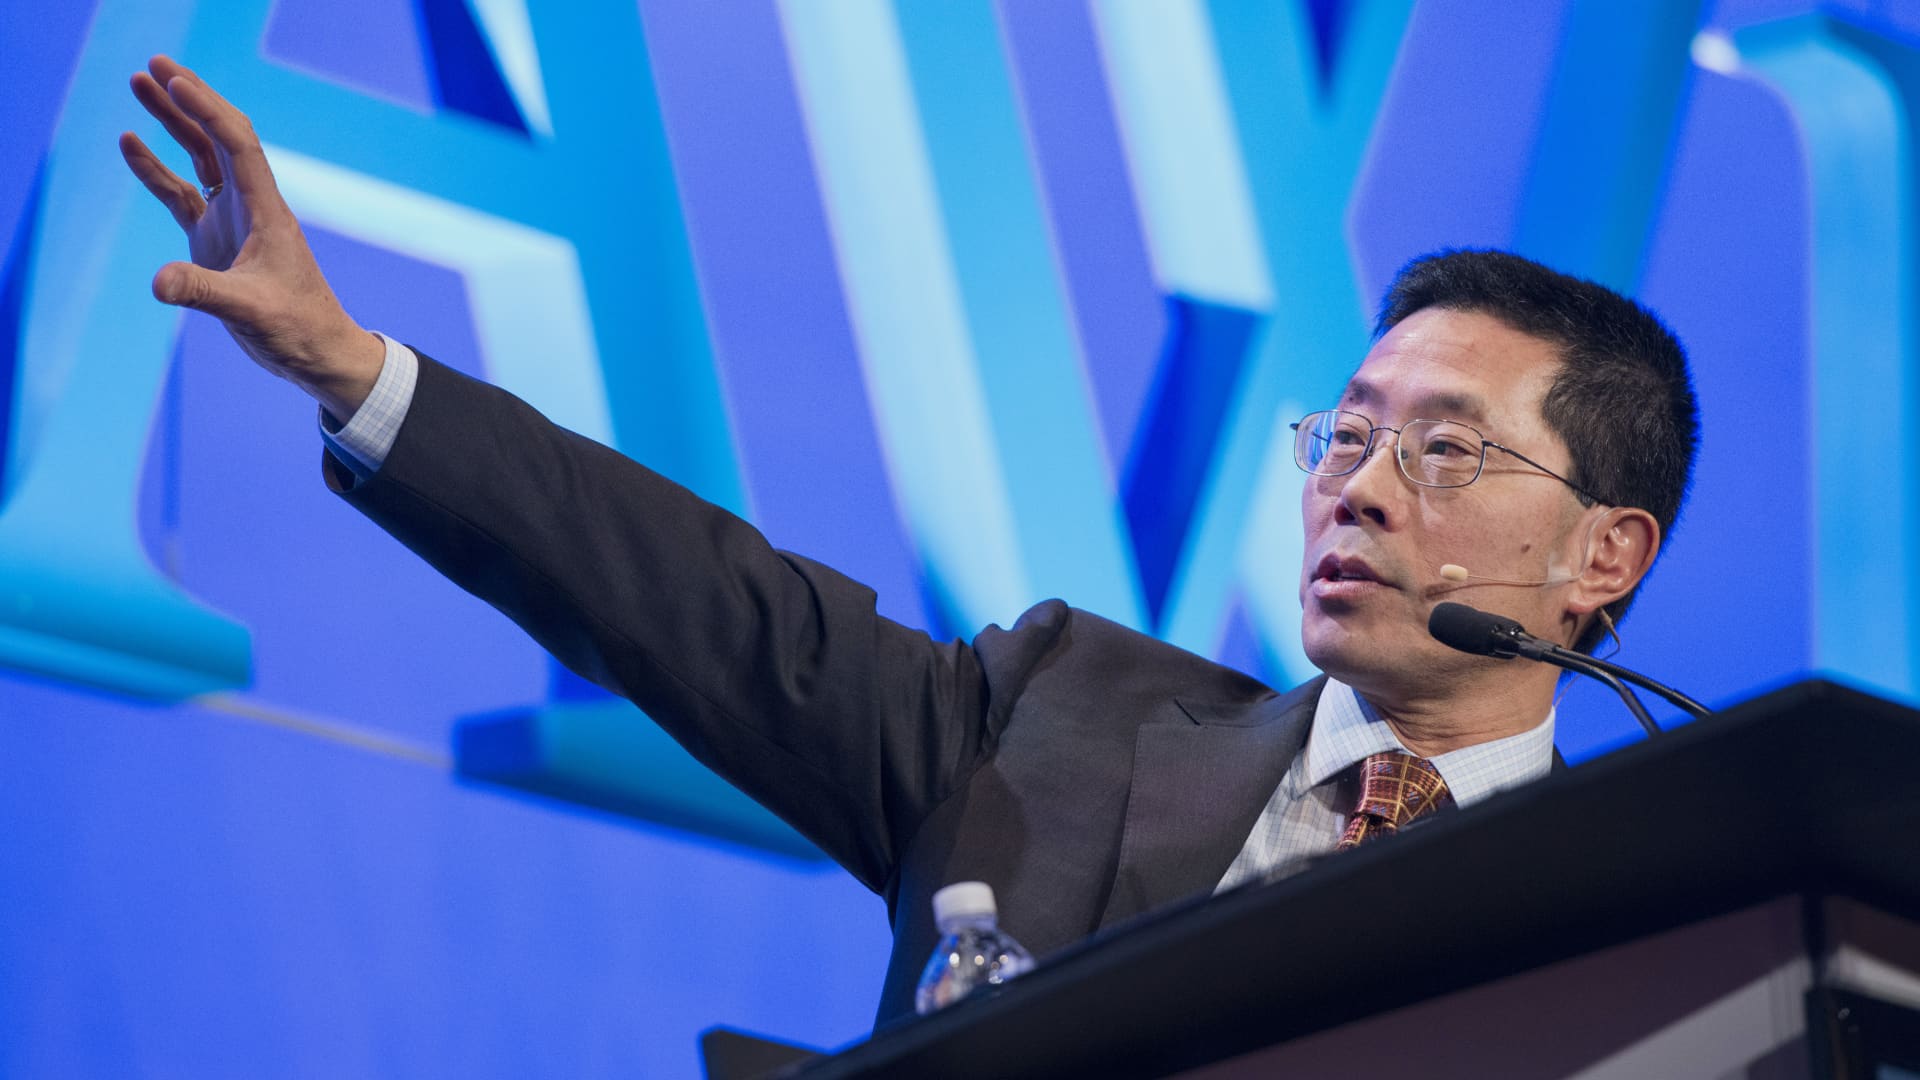 Yet-Ming Chiang, professor of materials science and engineering at Massachusetts Institute of Technology, speaks during the 2016 IHS CERAWeek conference in Houston, Texas, Feb. 26, 2016.